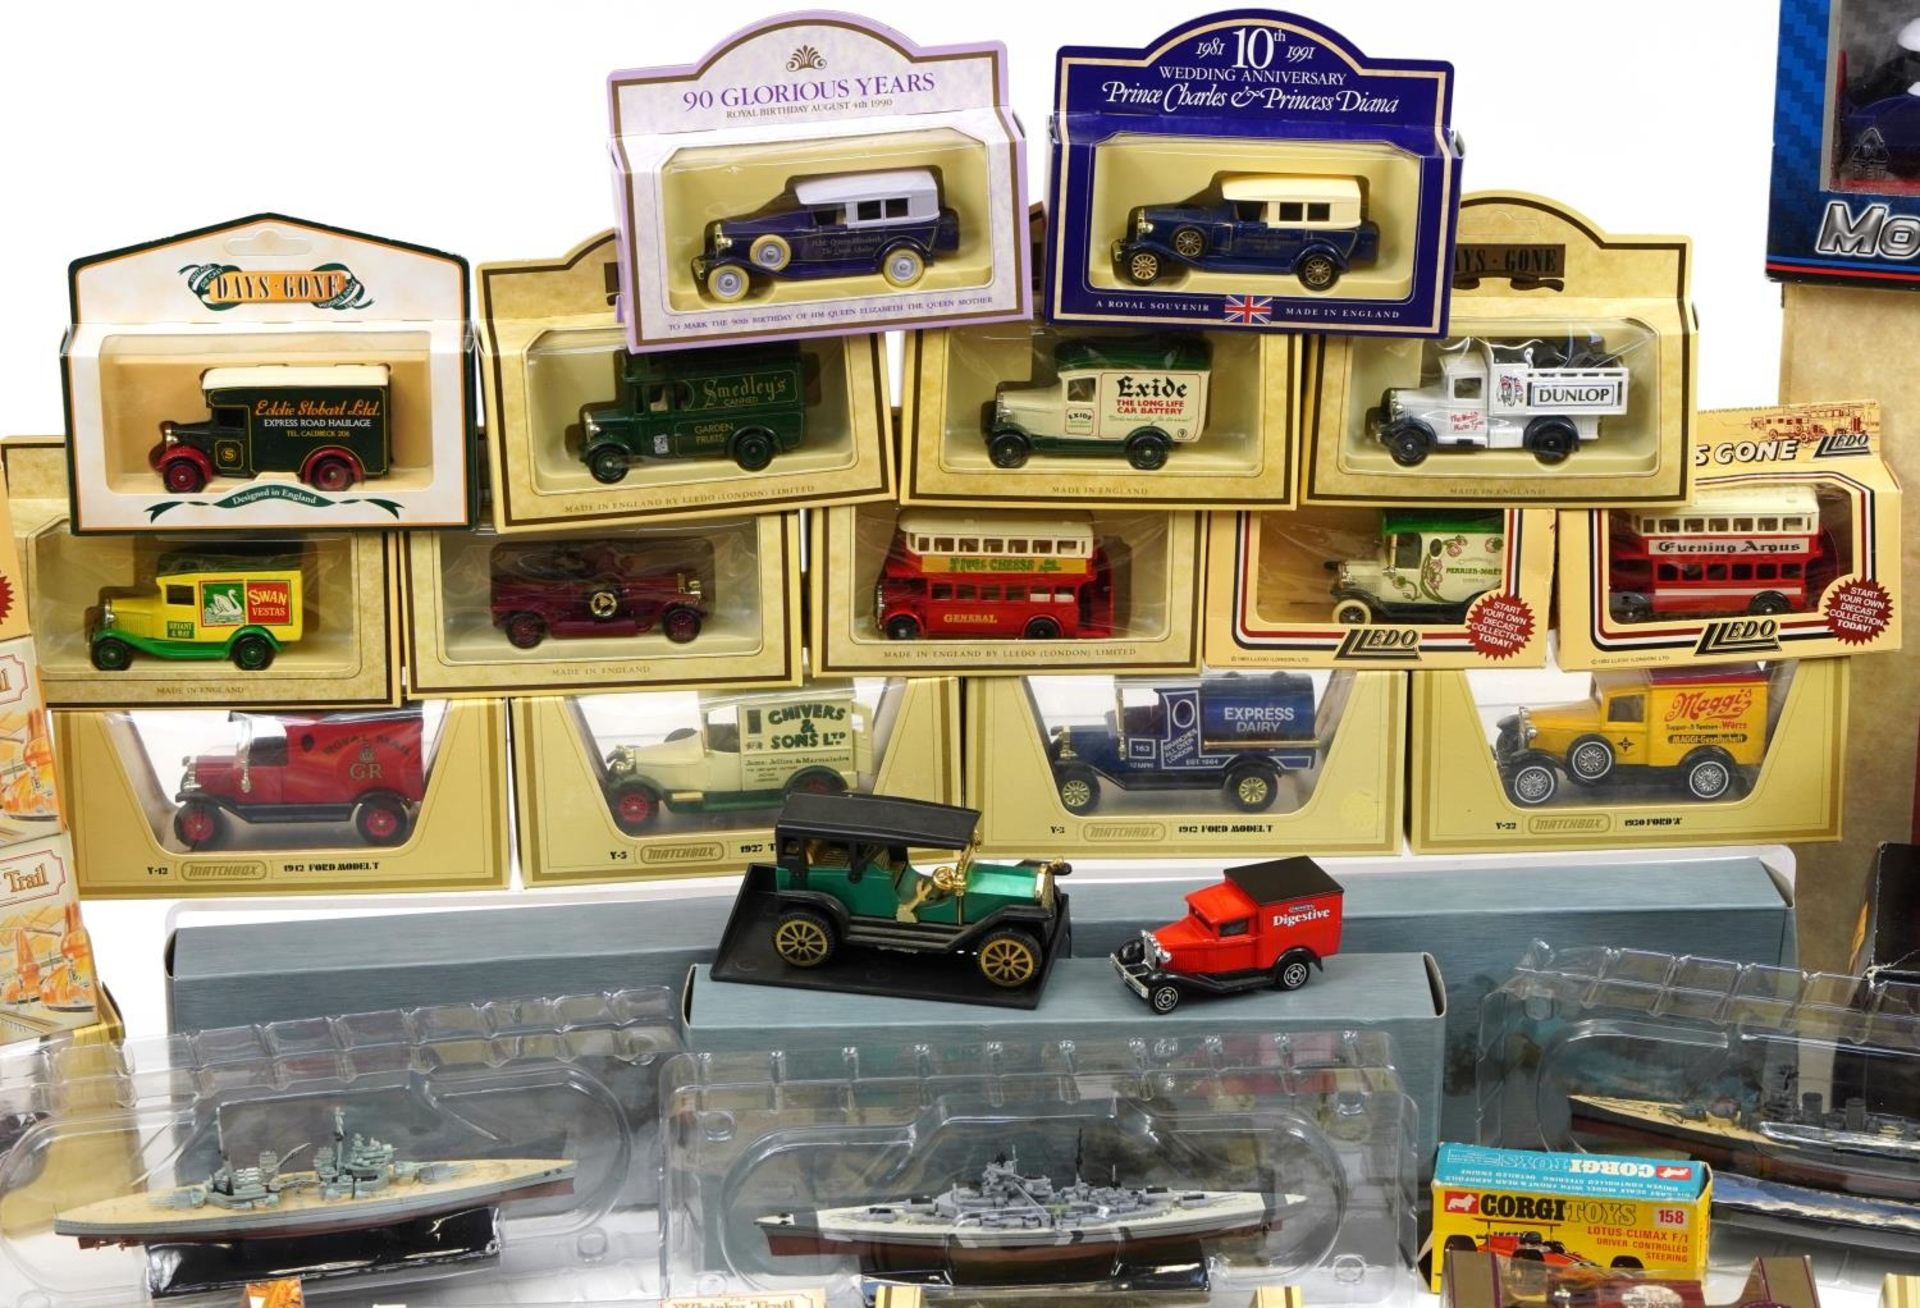 Collection of diecast advertising collector's vehicles and boats with boxes including Days Gone, - Image 3 of 6